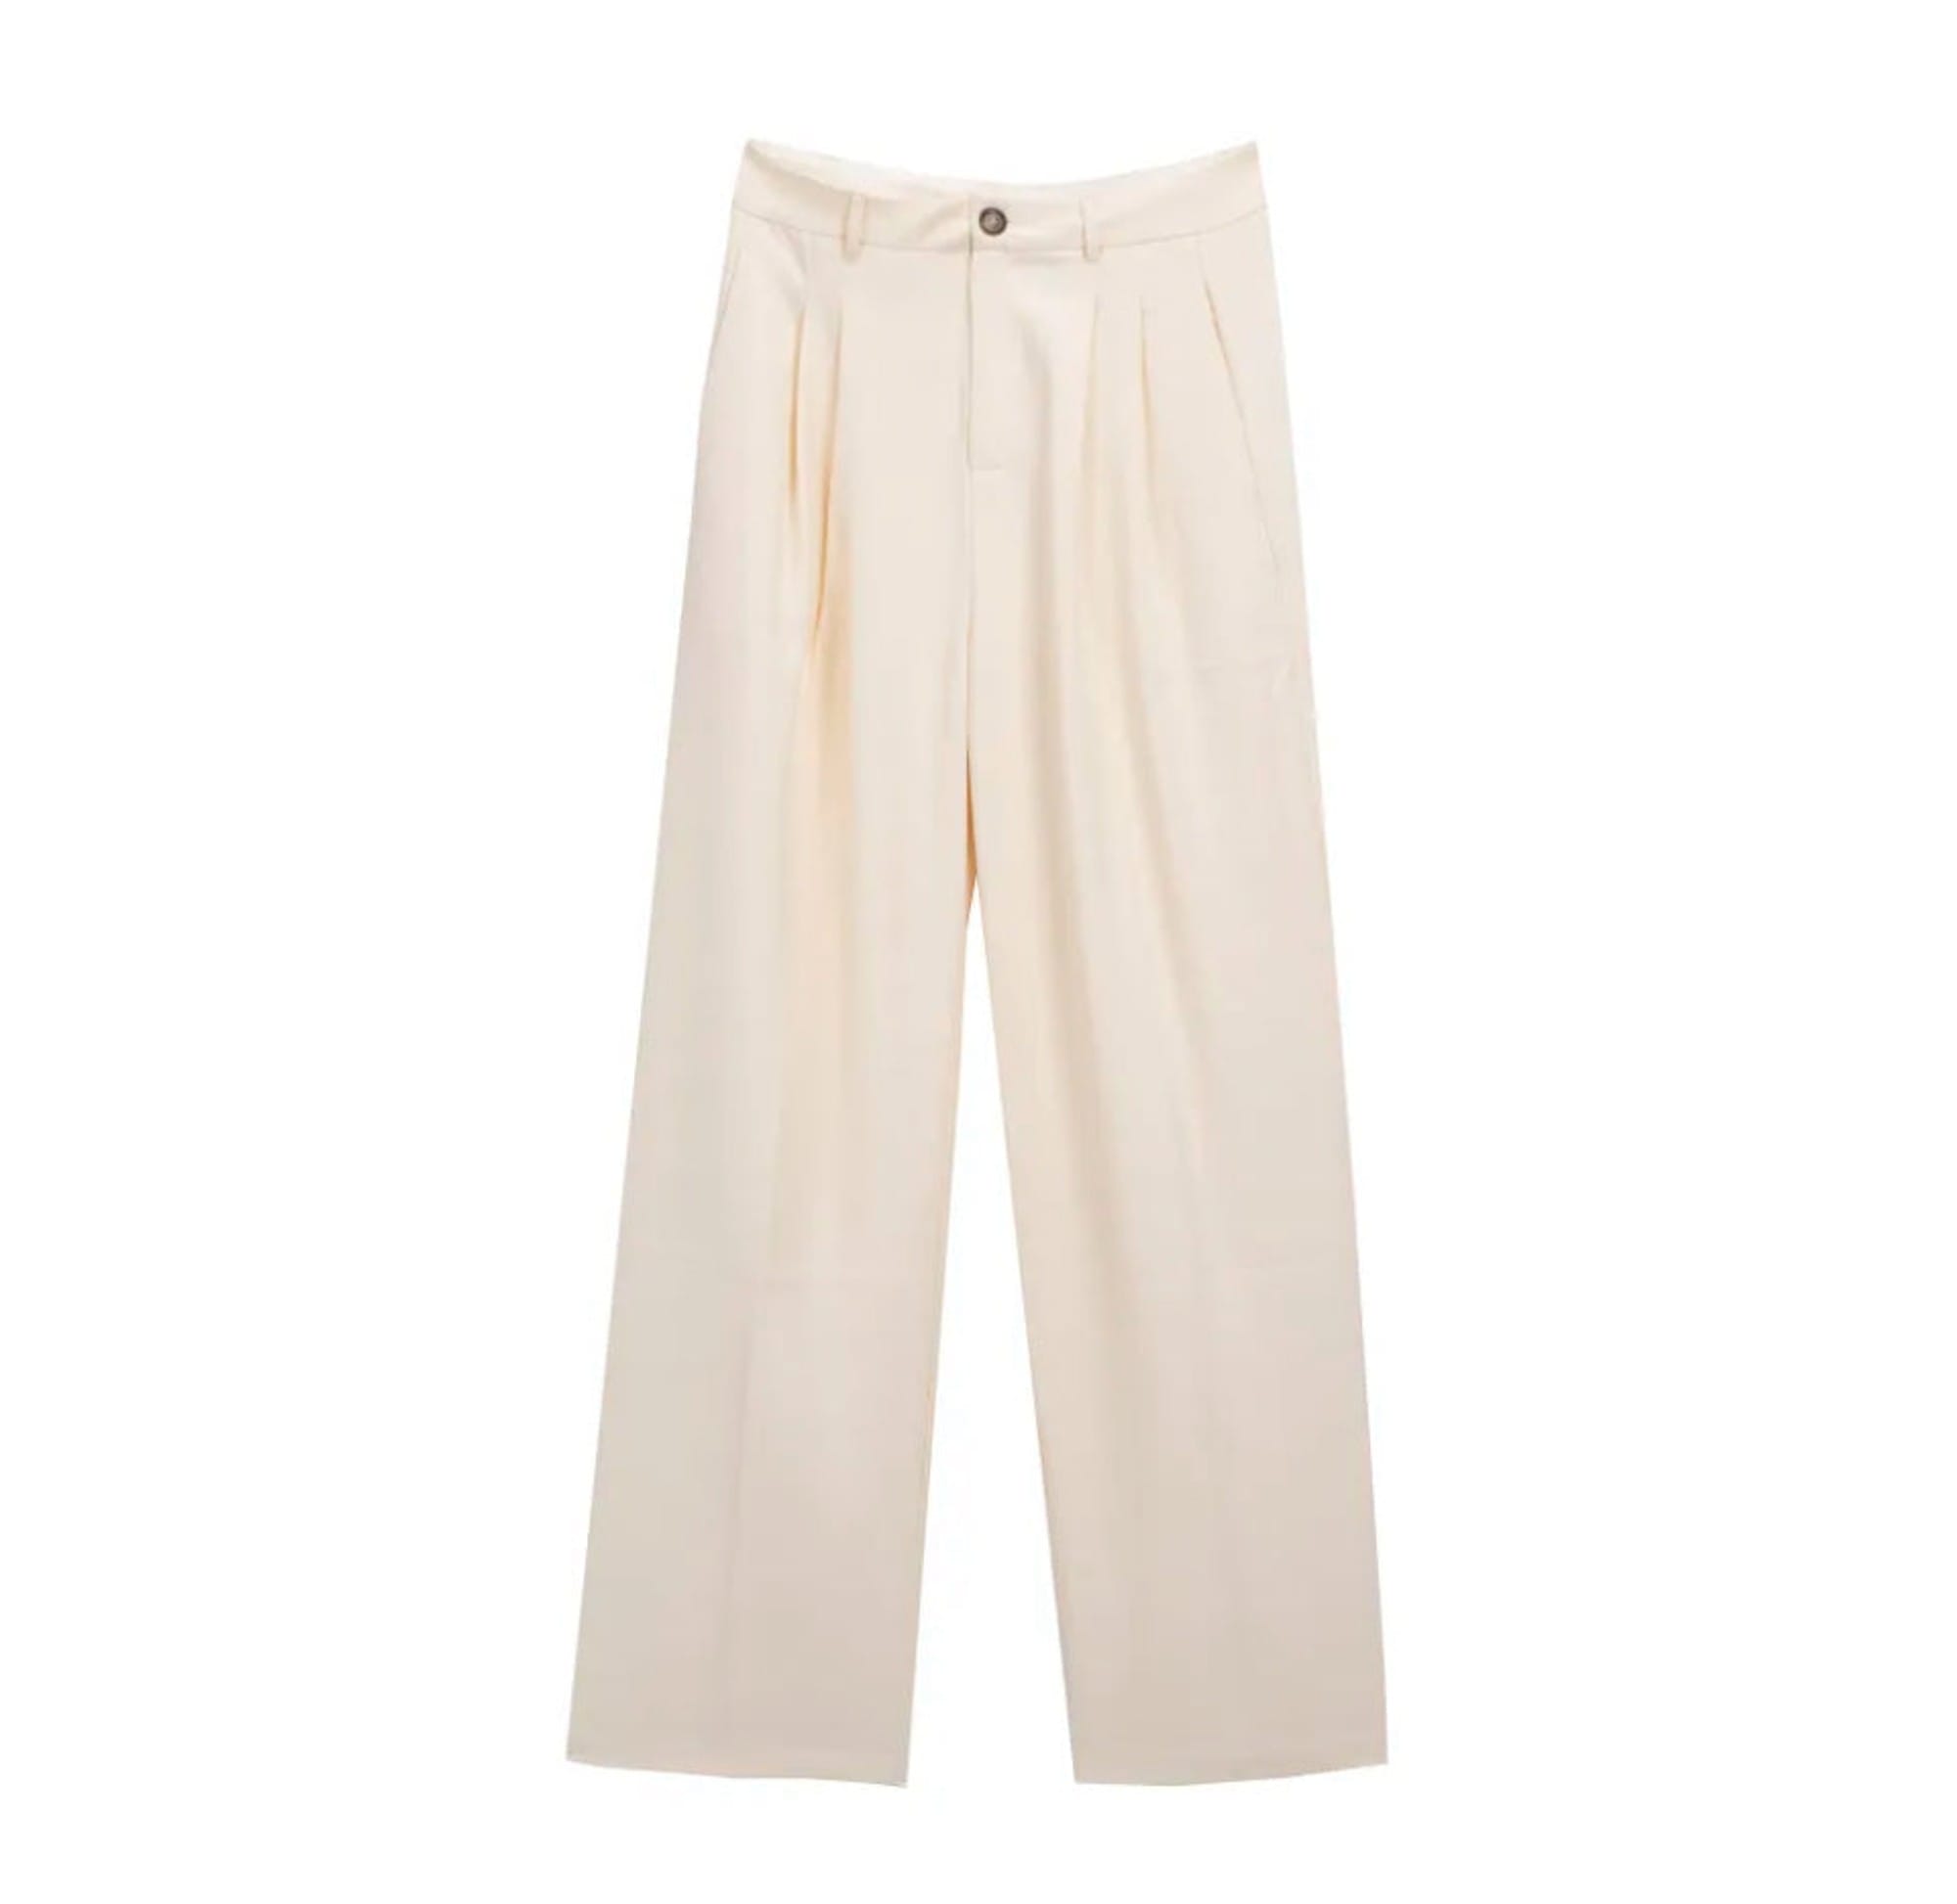 Sweewe French Trousers in Cream 